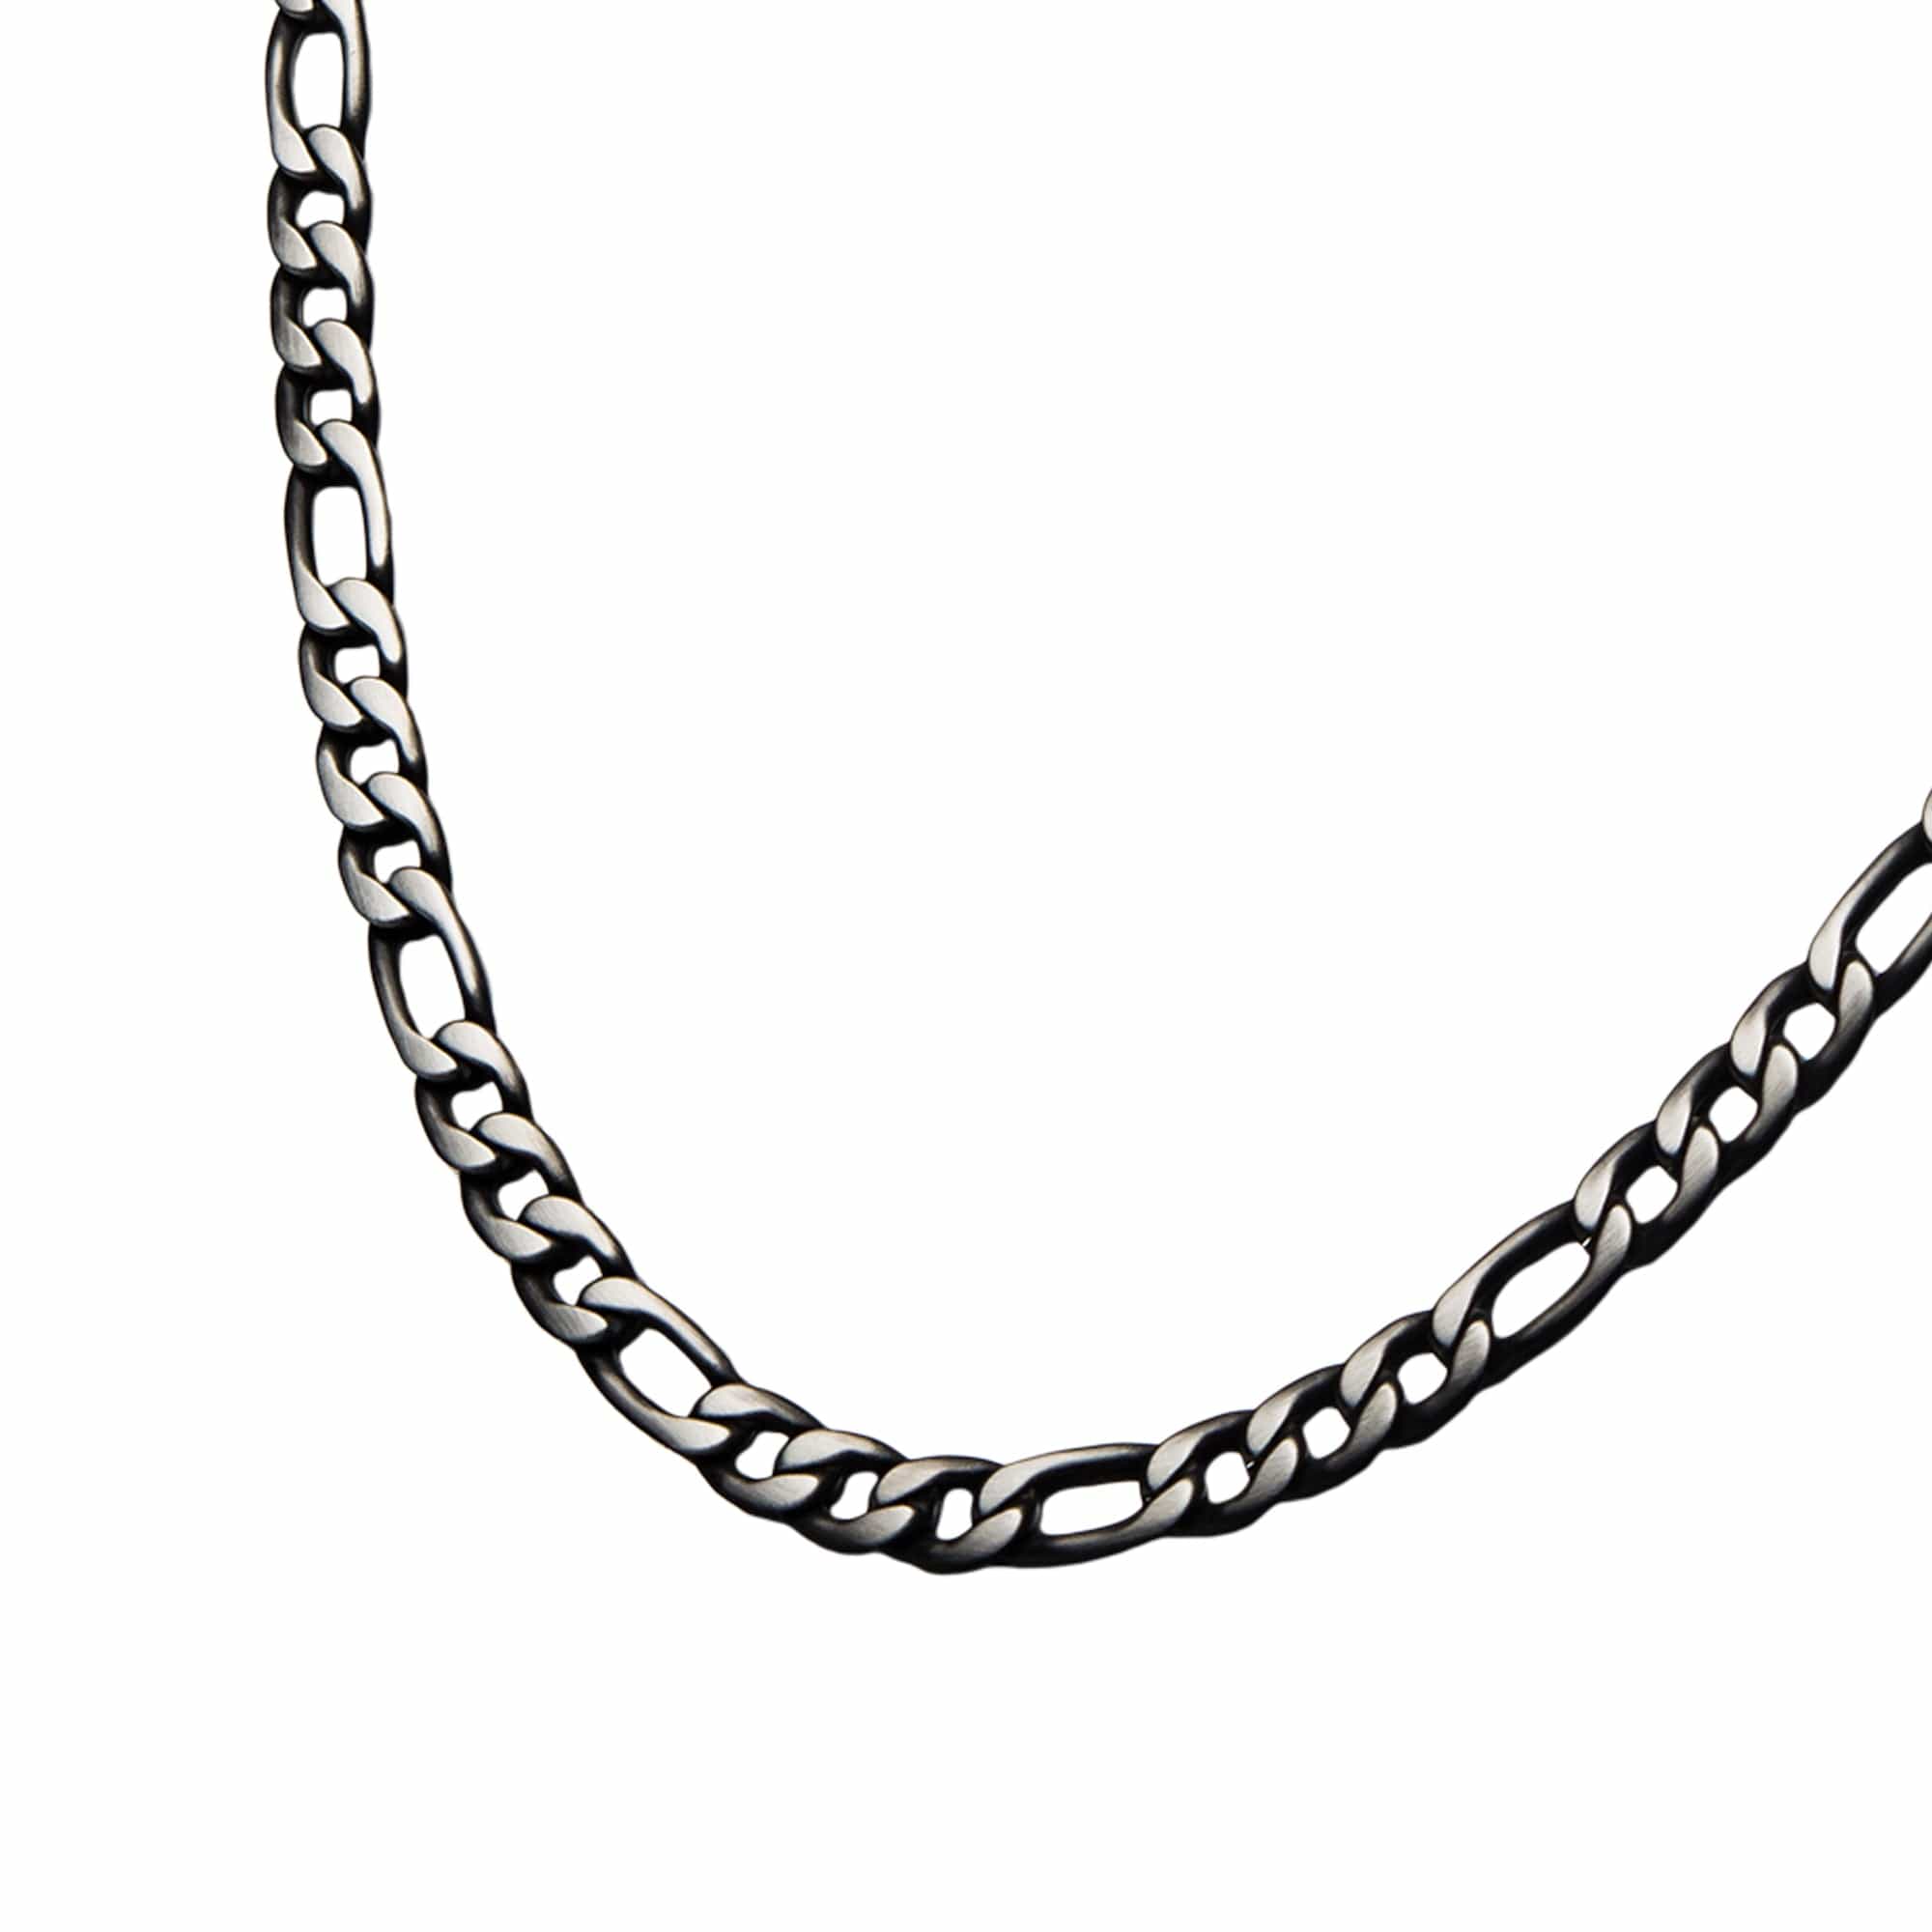 INOX JEWELRY Chains Black and Silver Tone Stainless Steel 9mm Figaro Link Chain NSTC7628P-24